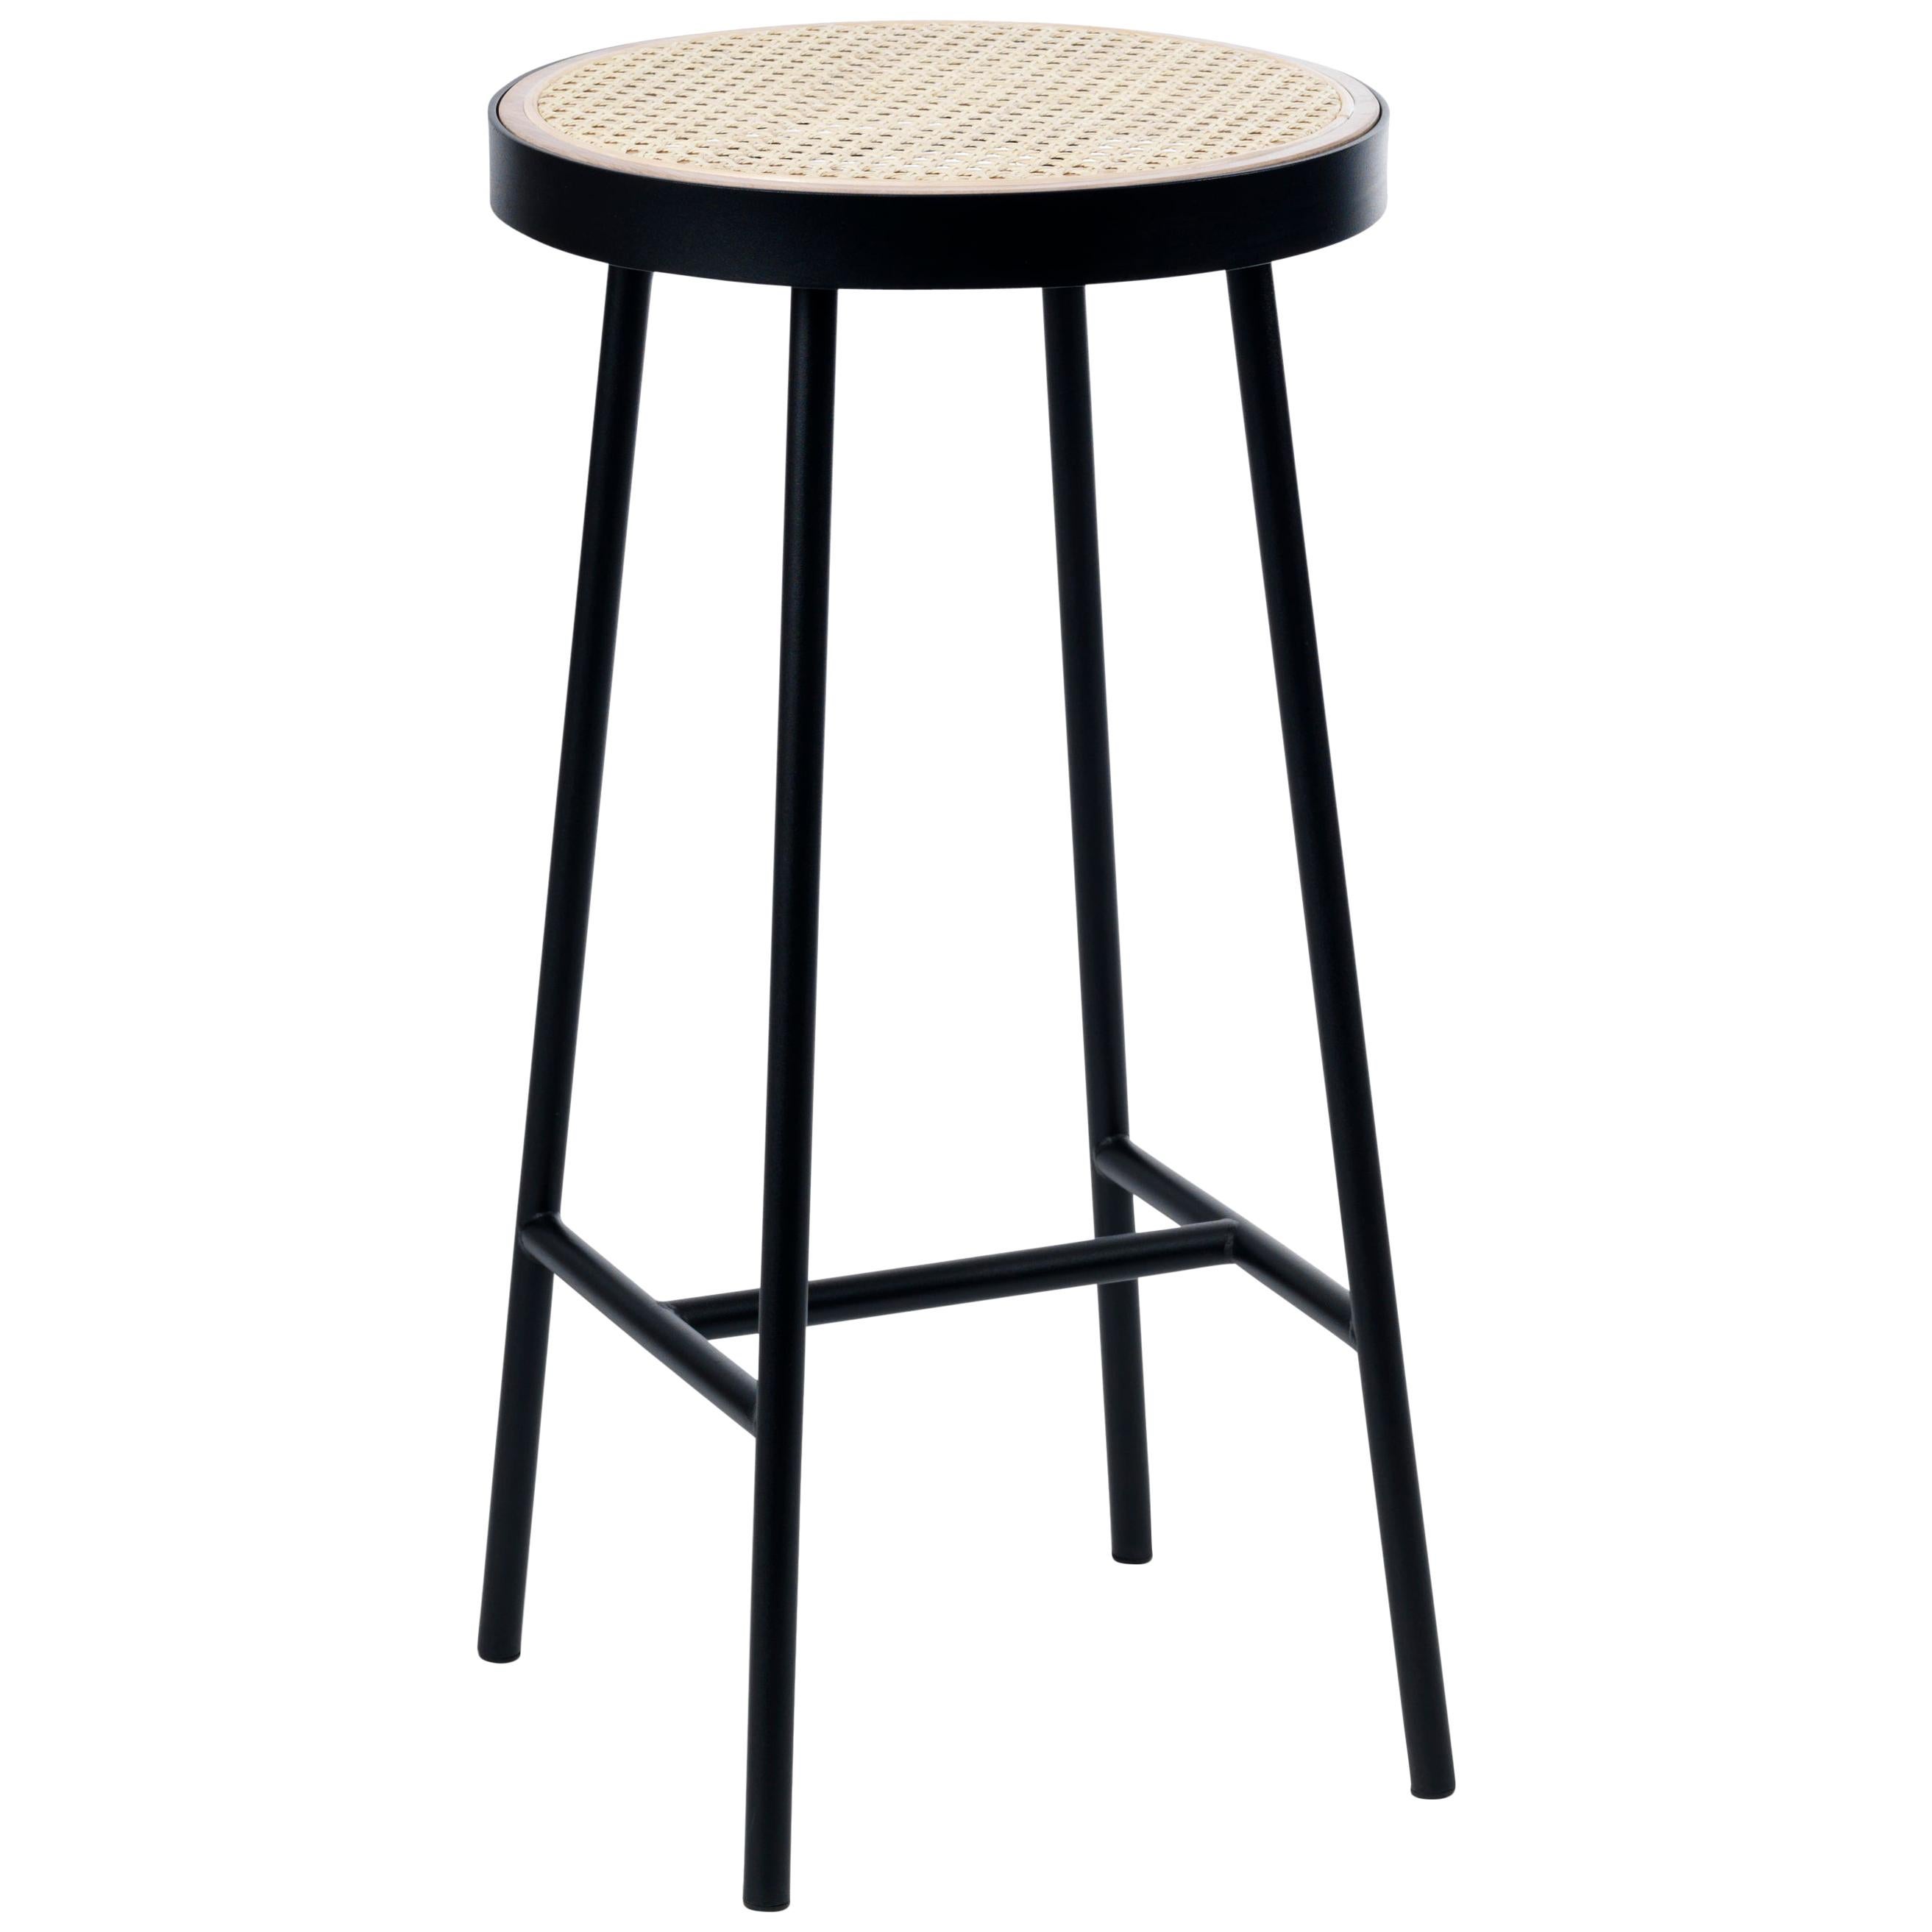 Be My Guest Cane Bar Stool by Charlotte Høncke for Warm Nordic